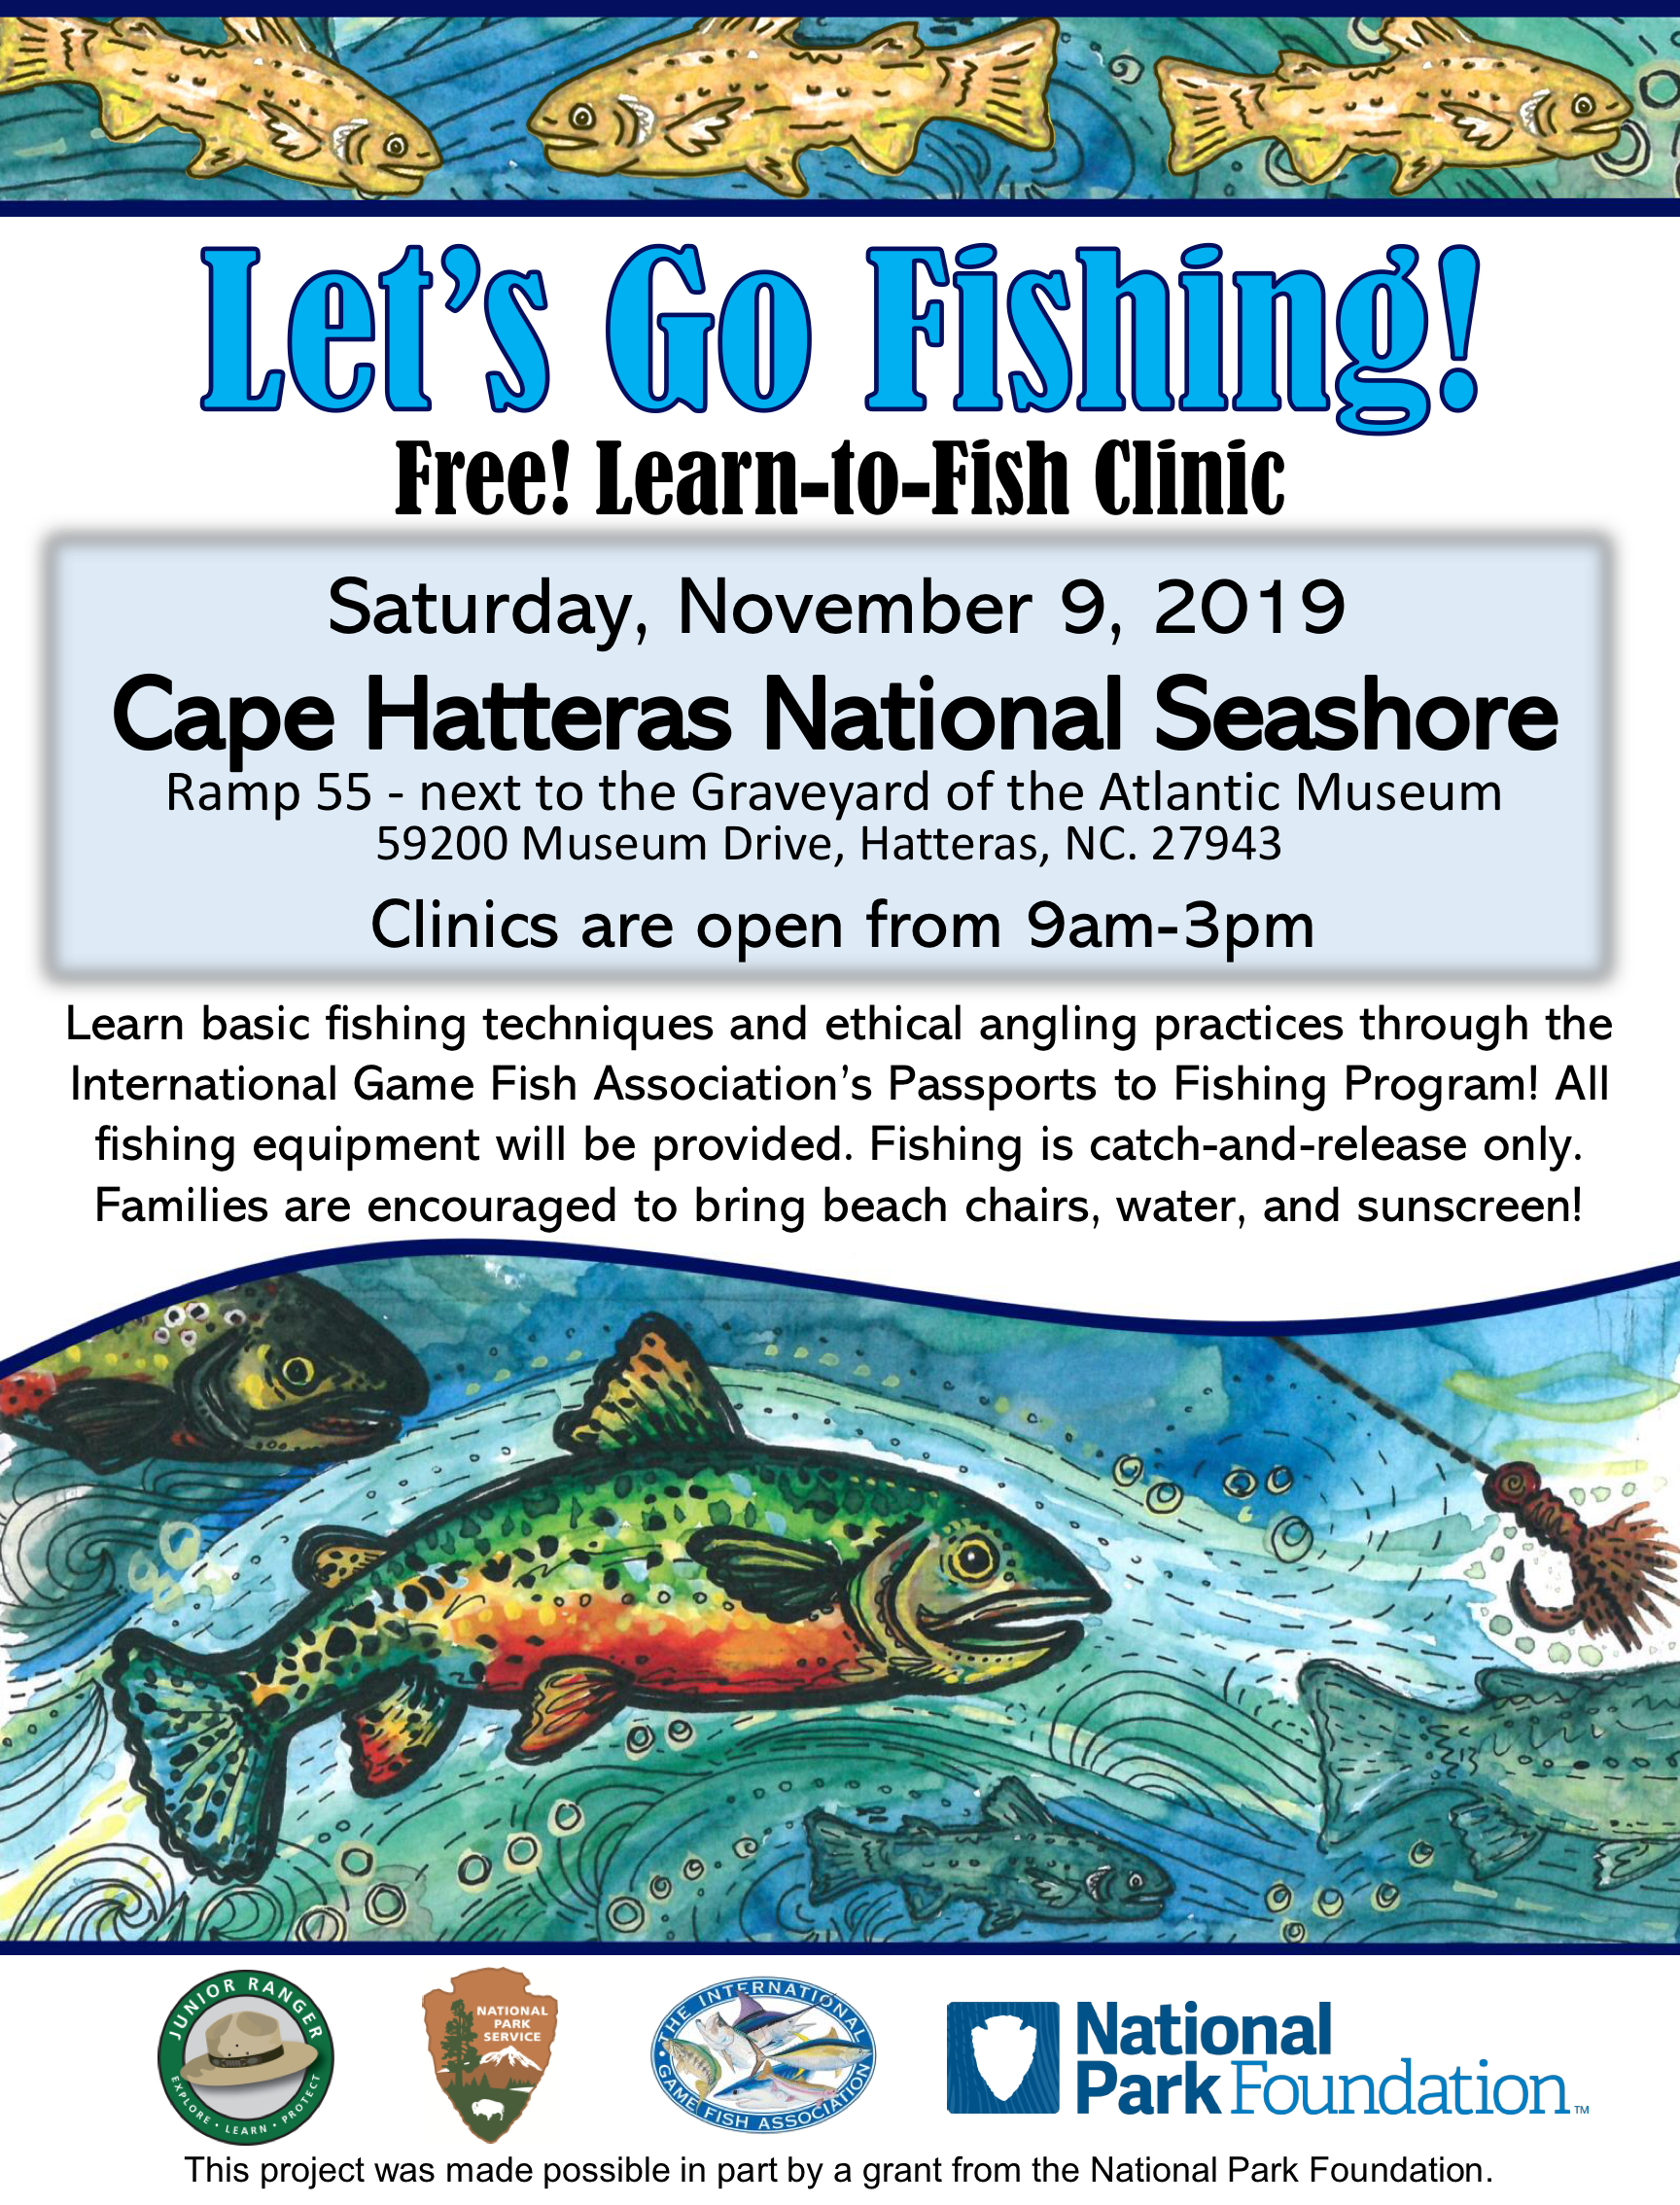 Learn-to-Fish clinic flyer.